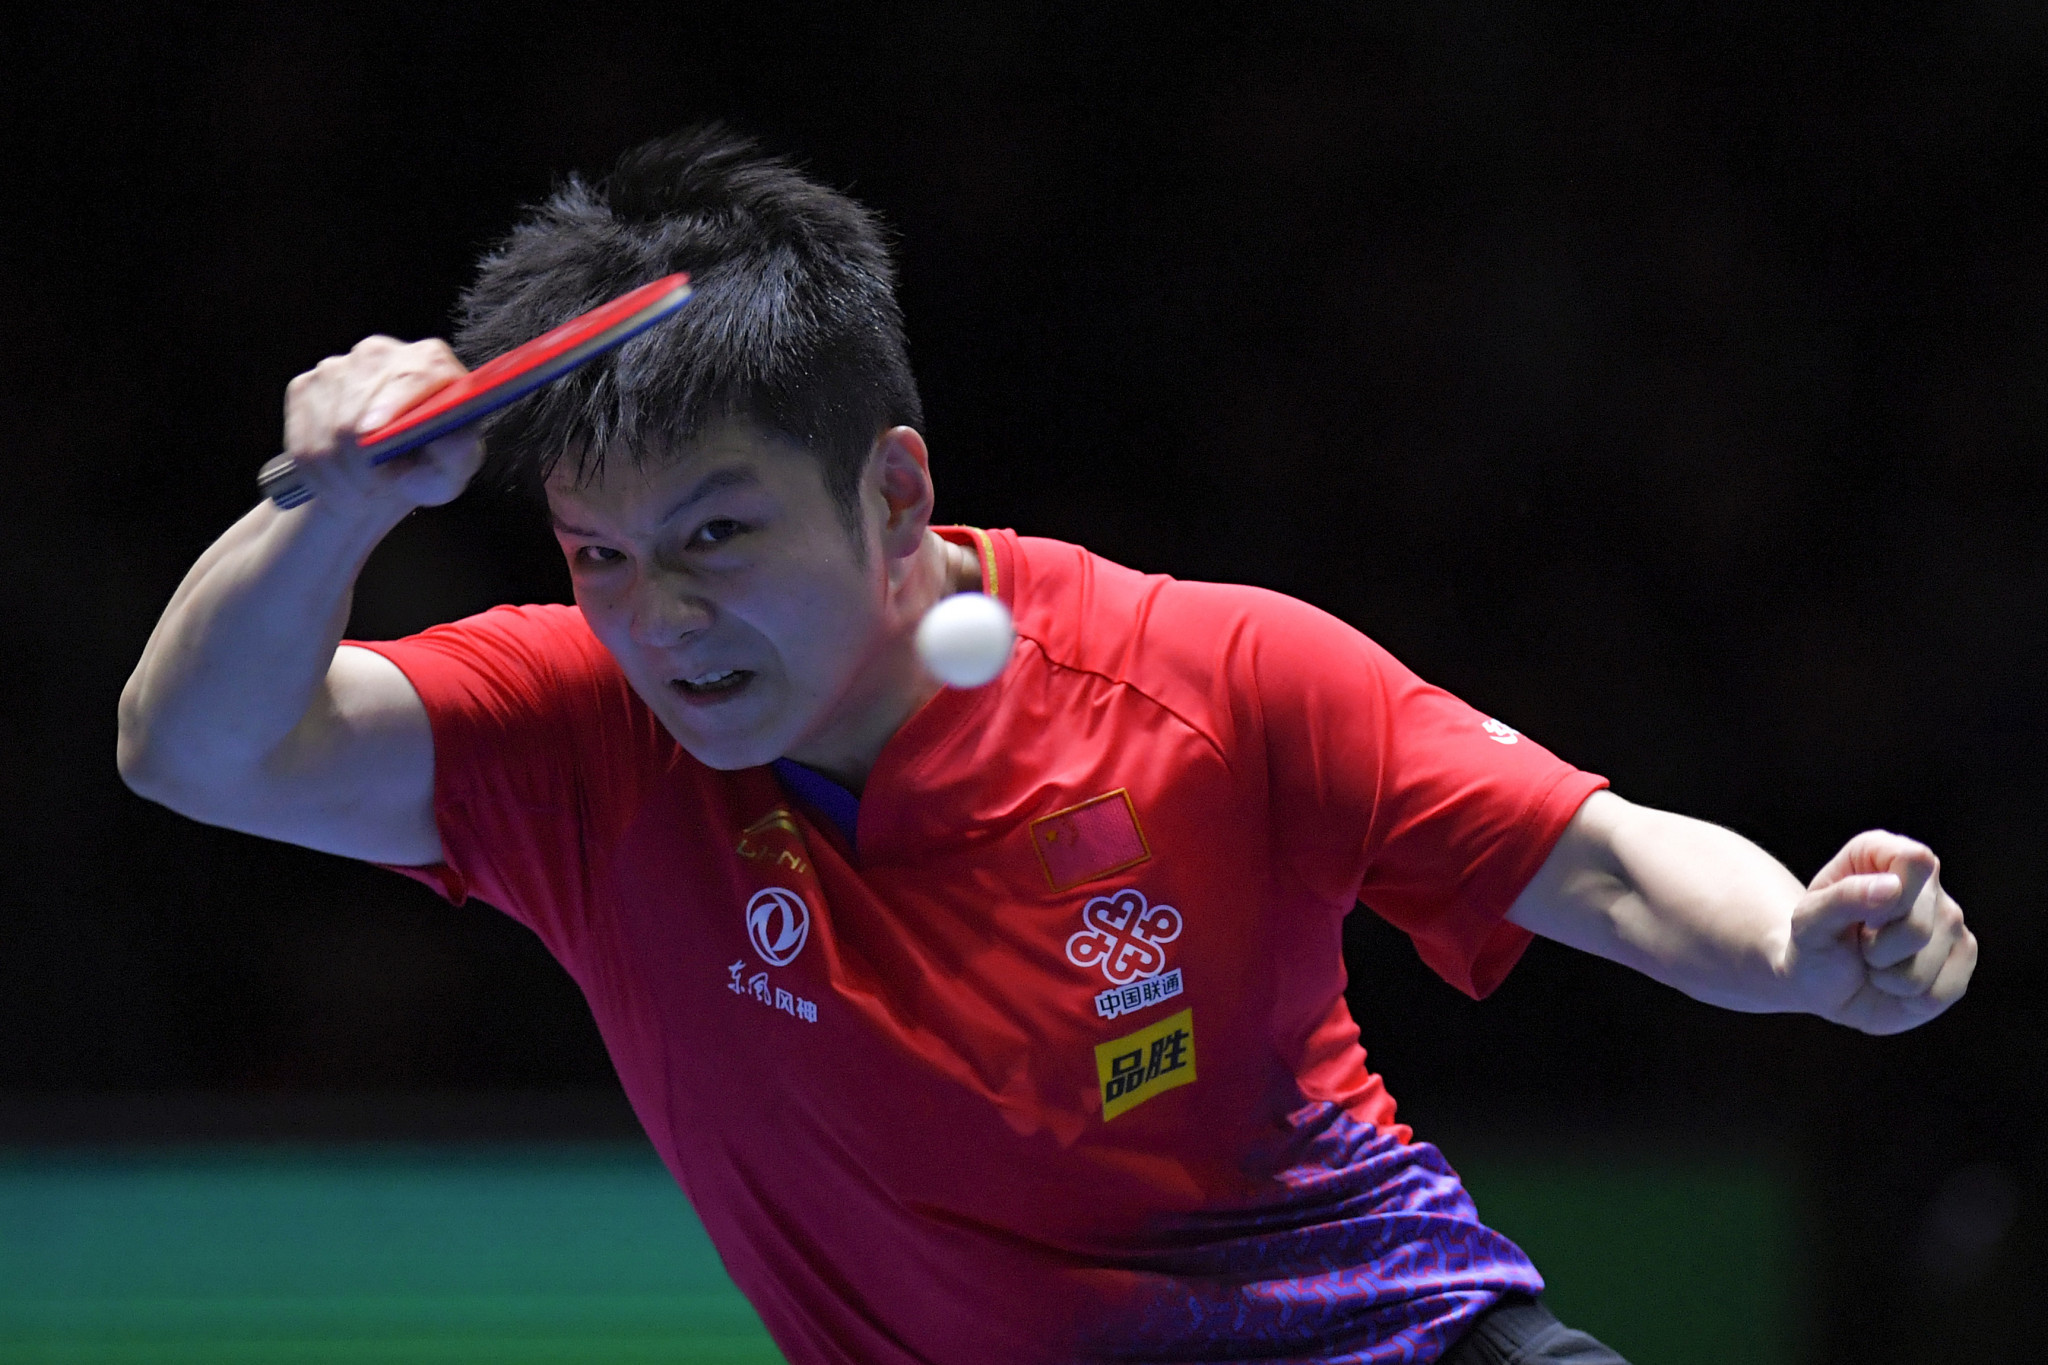 Stellar line-up set to compete in first-ever WTT Grand Smash in Singapore